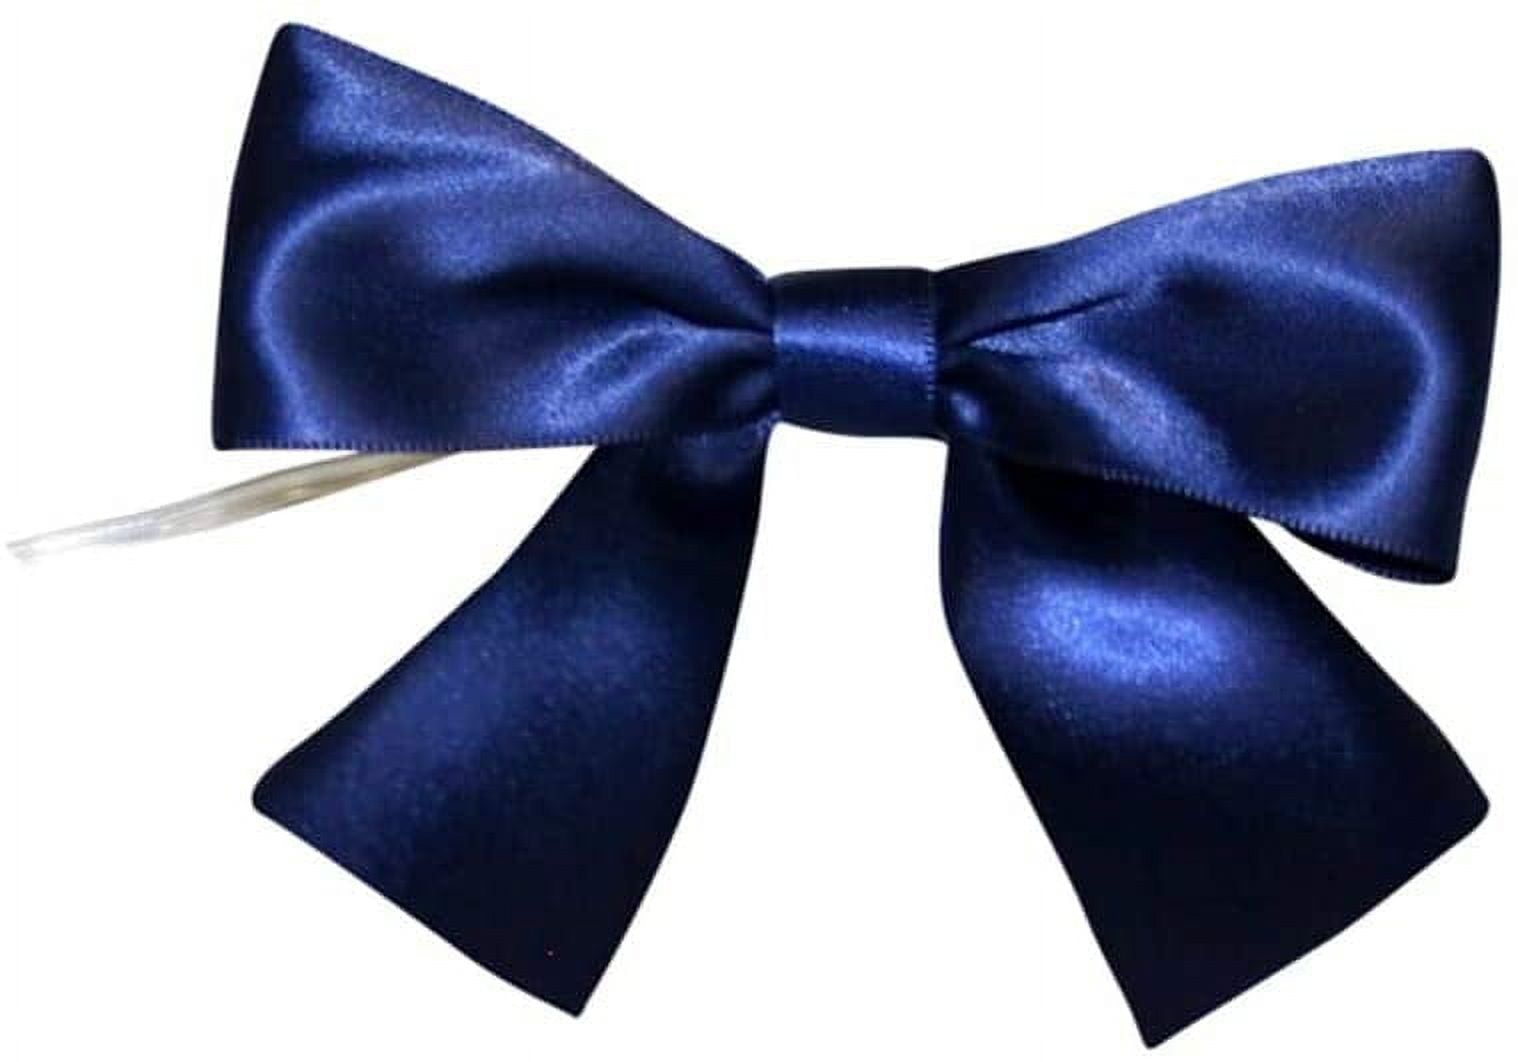  Solid Color Navy Blue Satin Ribbon, 3/8 Inches x 25 Yards  Fabric Satin Ribbon for Gift Wrapping, Crafts, Hair Bows Making, Wreath,  Wedding Party Decoration and Other Sewing Projects